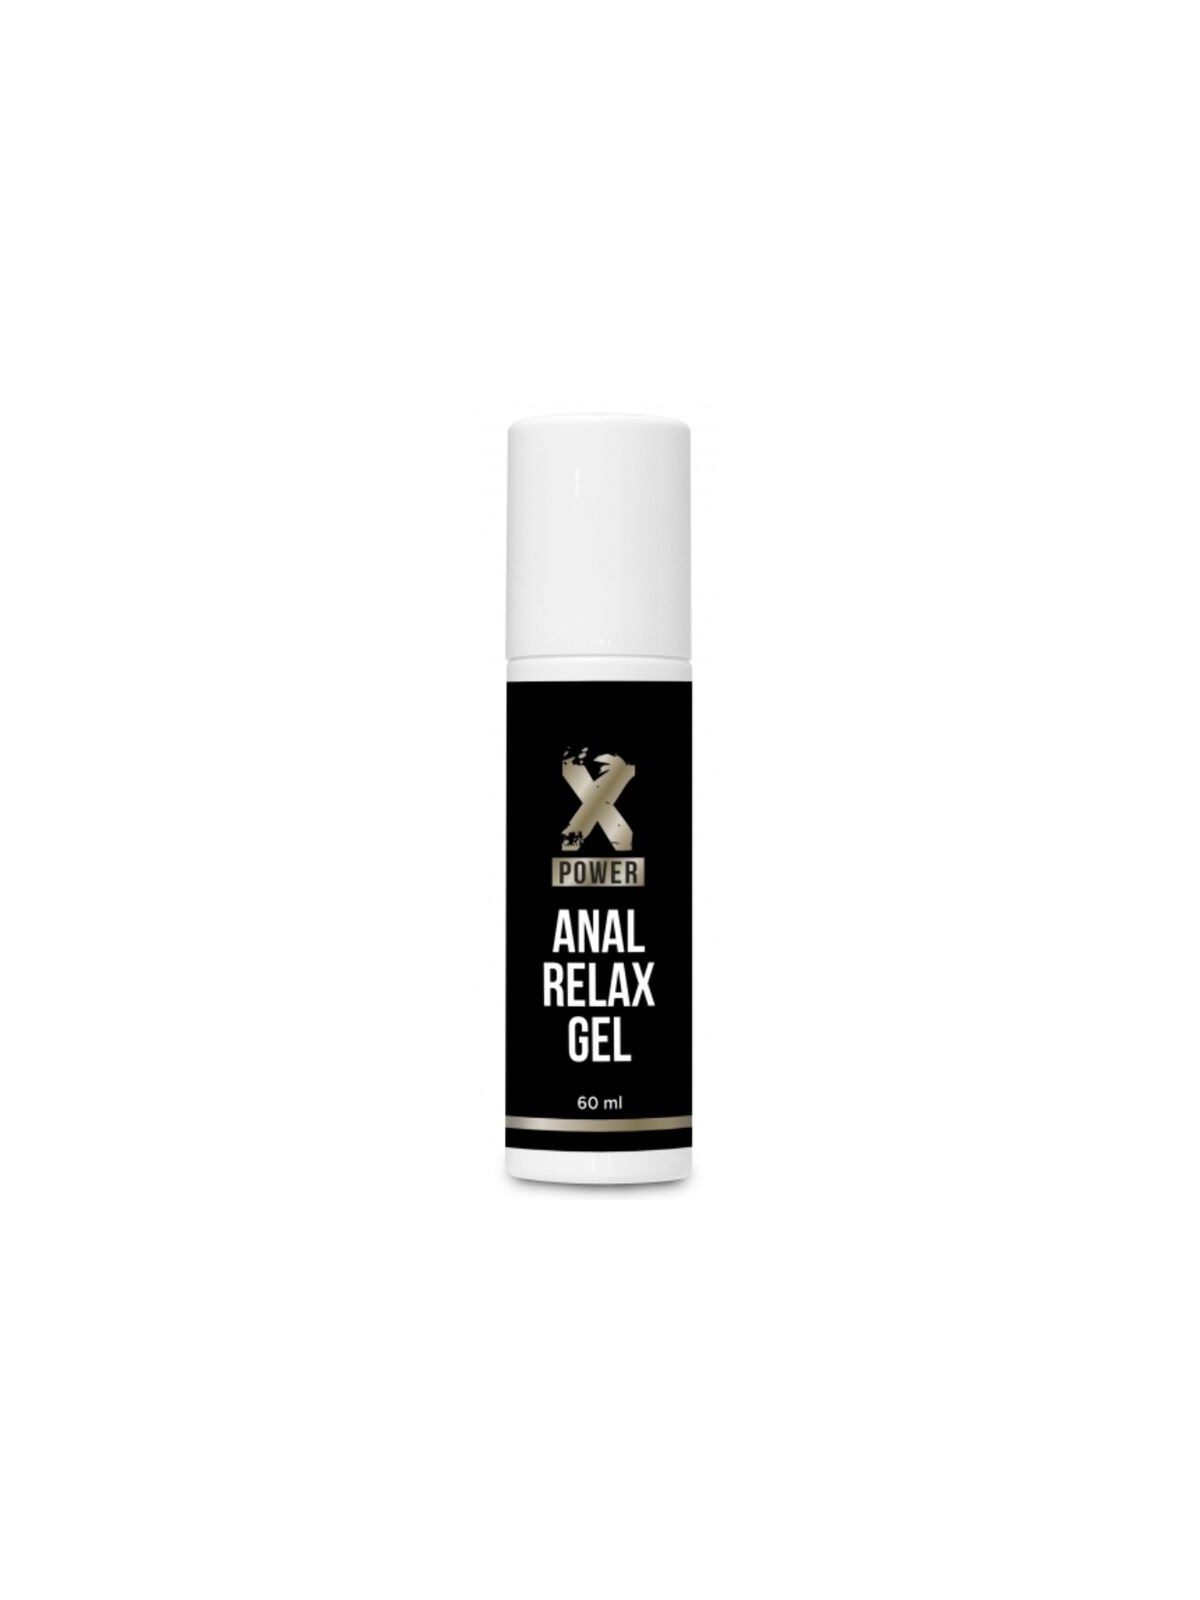 Xpower Anal Relax Gel Relajante Anal 60 ml - Comprar Relajante anal Xpower - Lubricantes relajante anal (1)